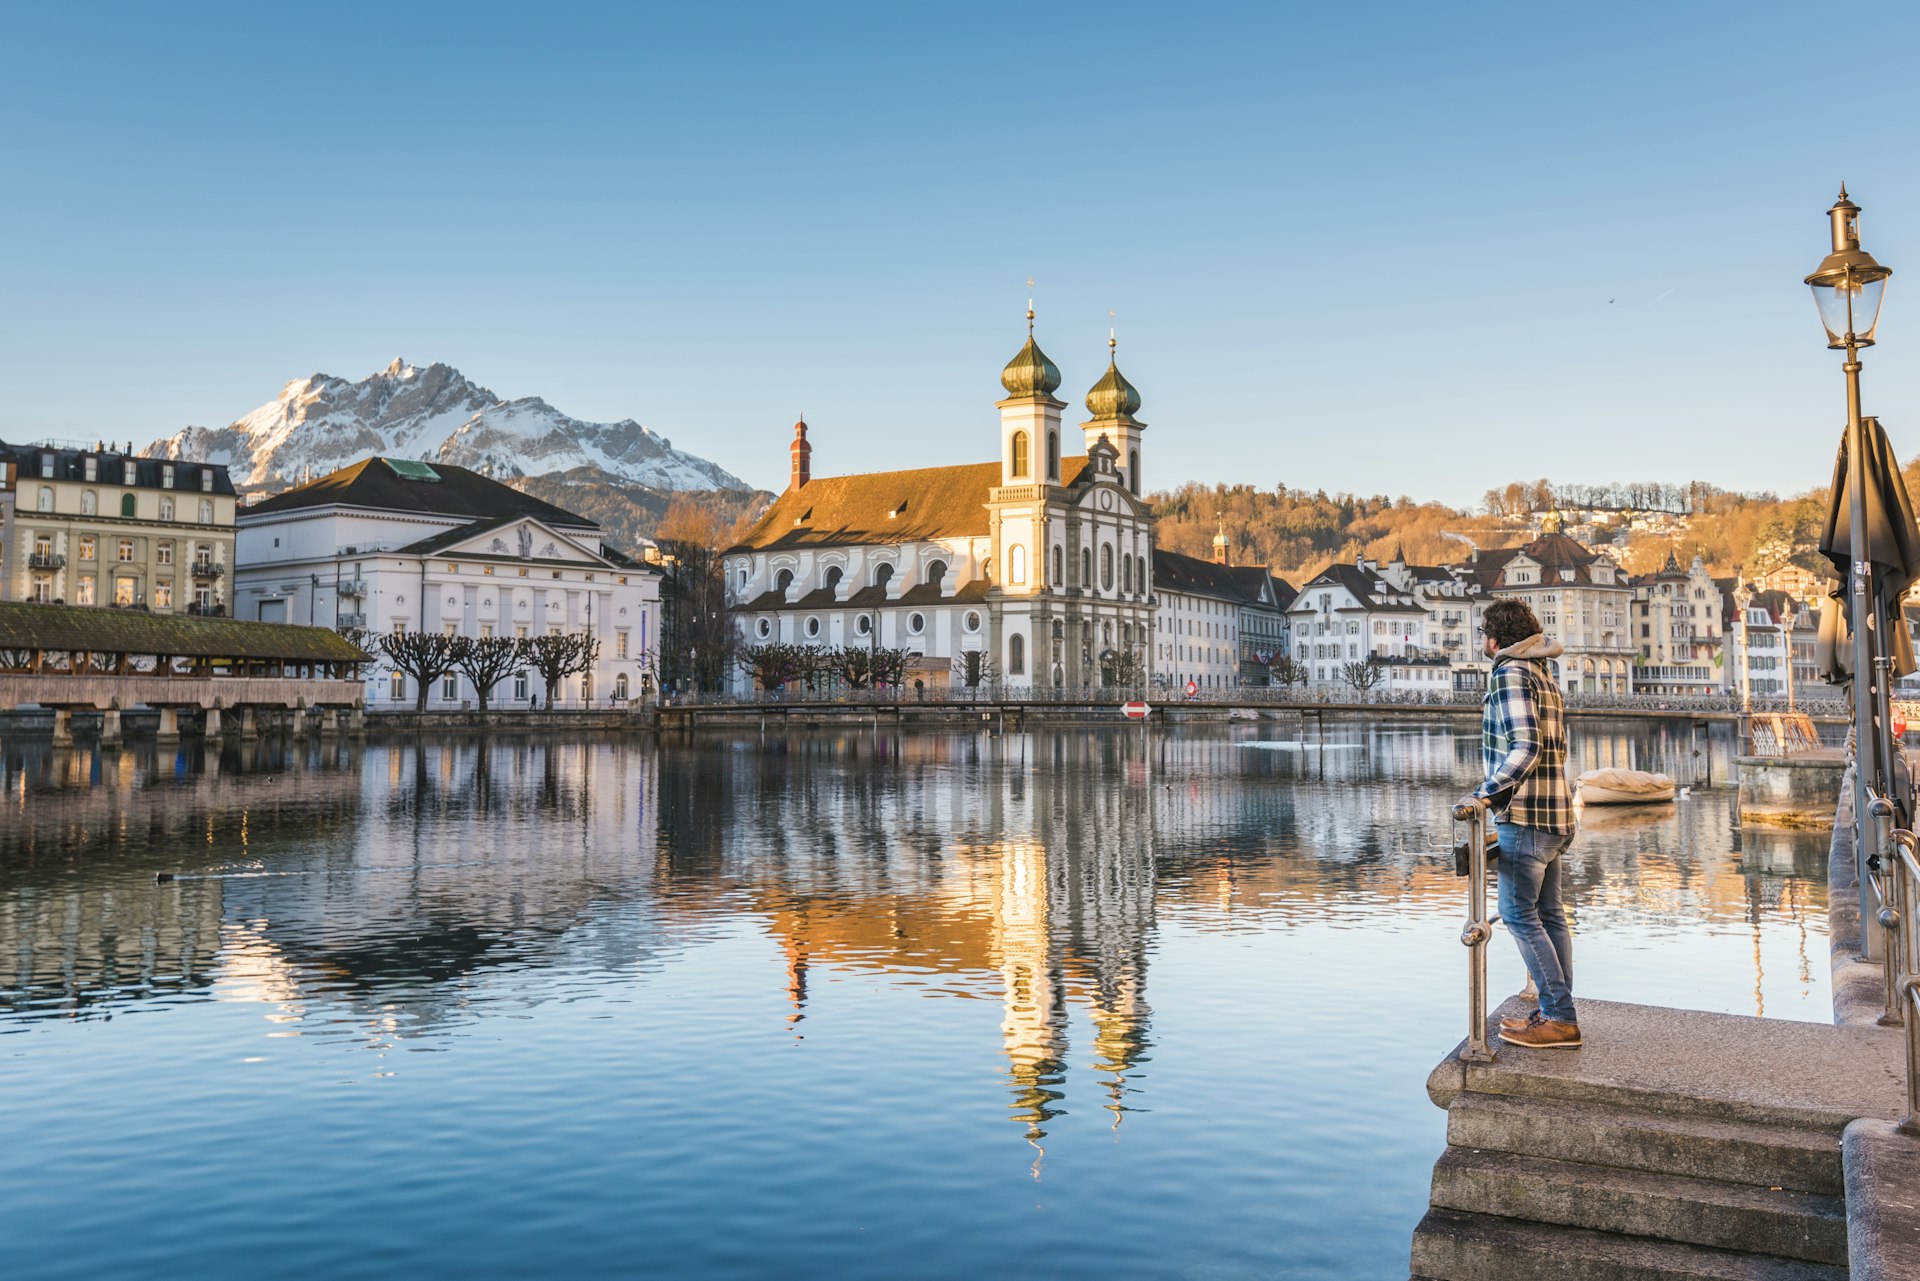 A man looks at the Jesuit Church and Mount Pilatusfrom the banks of Reuss River in Lucerne, Switzerland